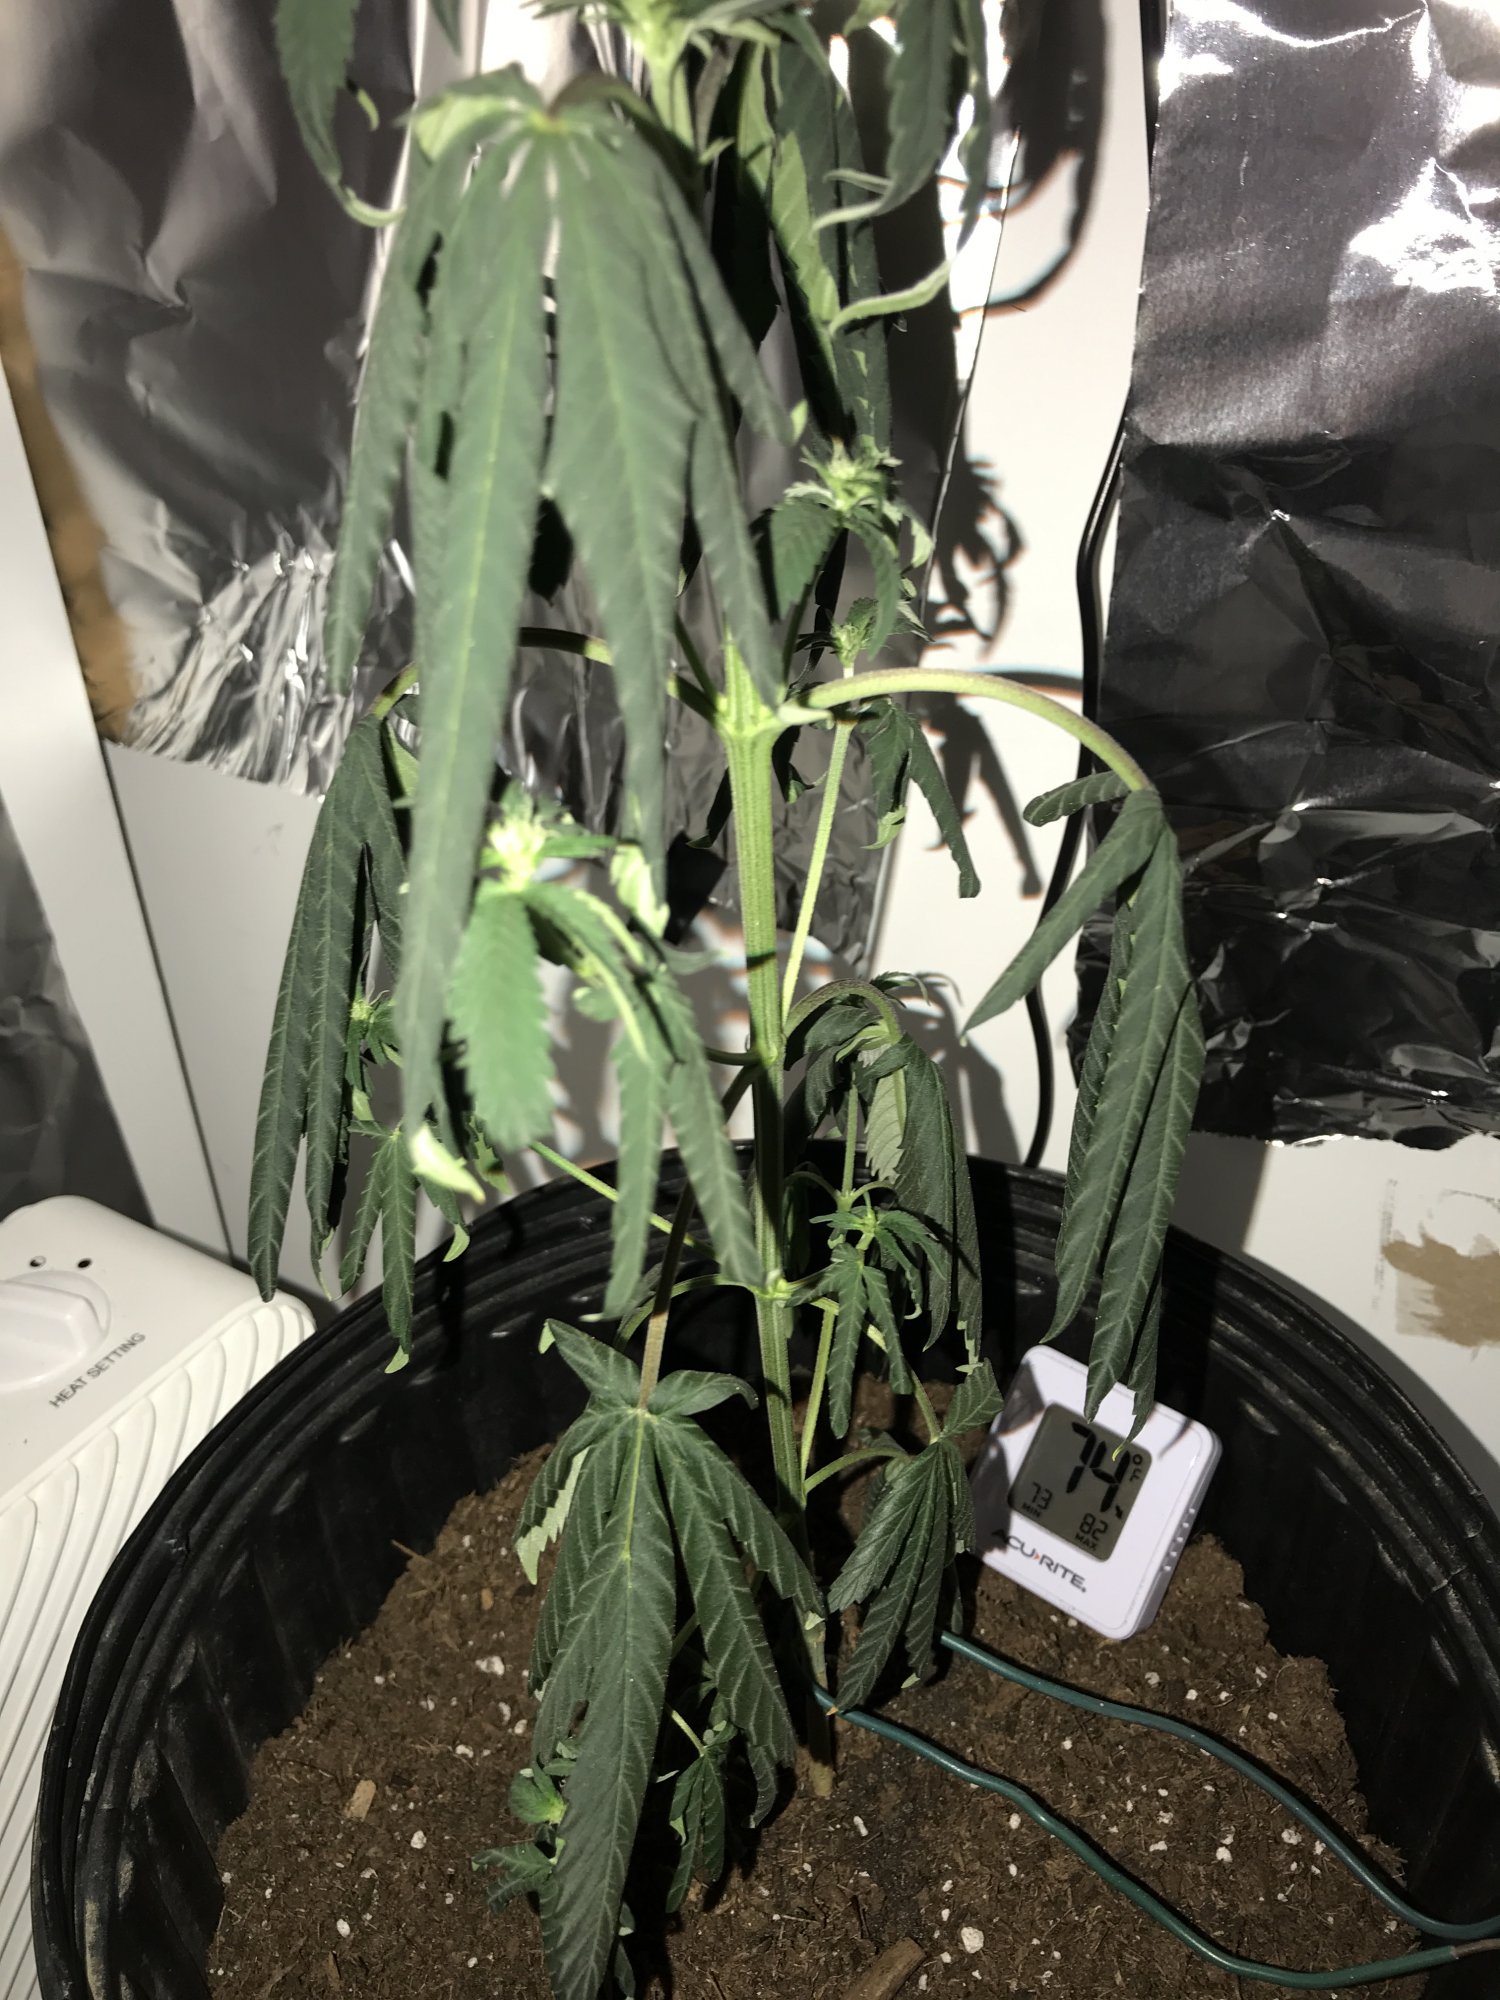 What do i do droopy leaves 2